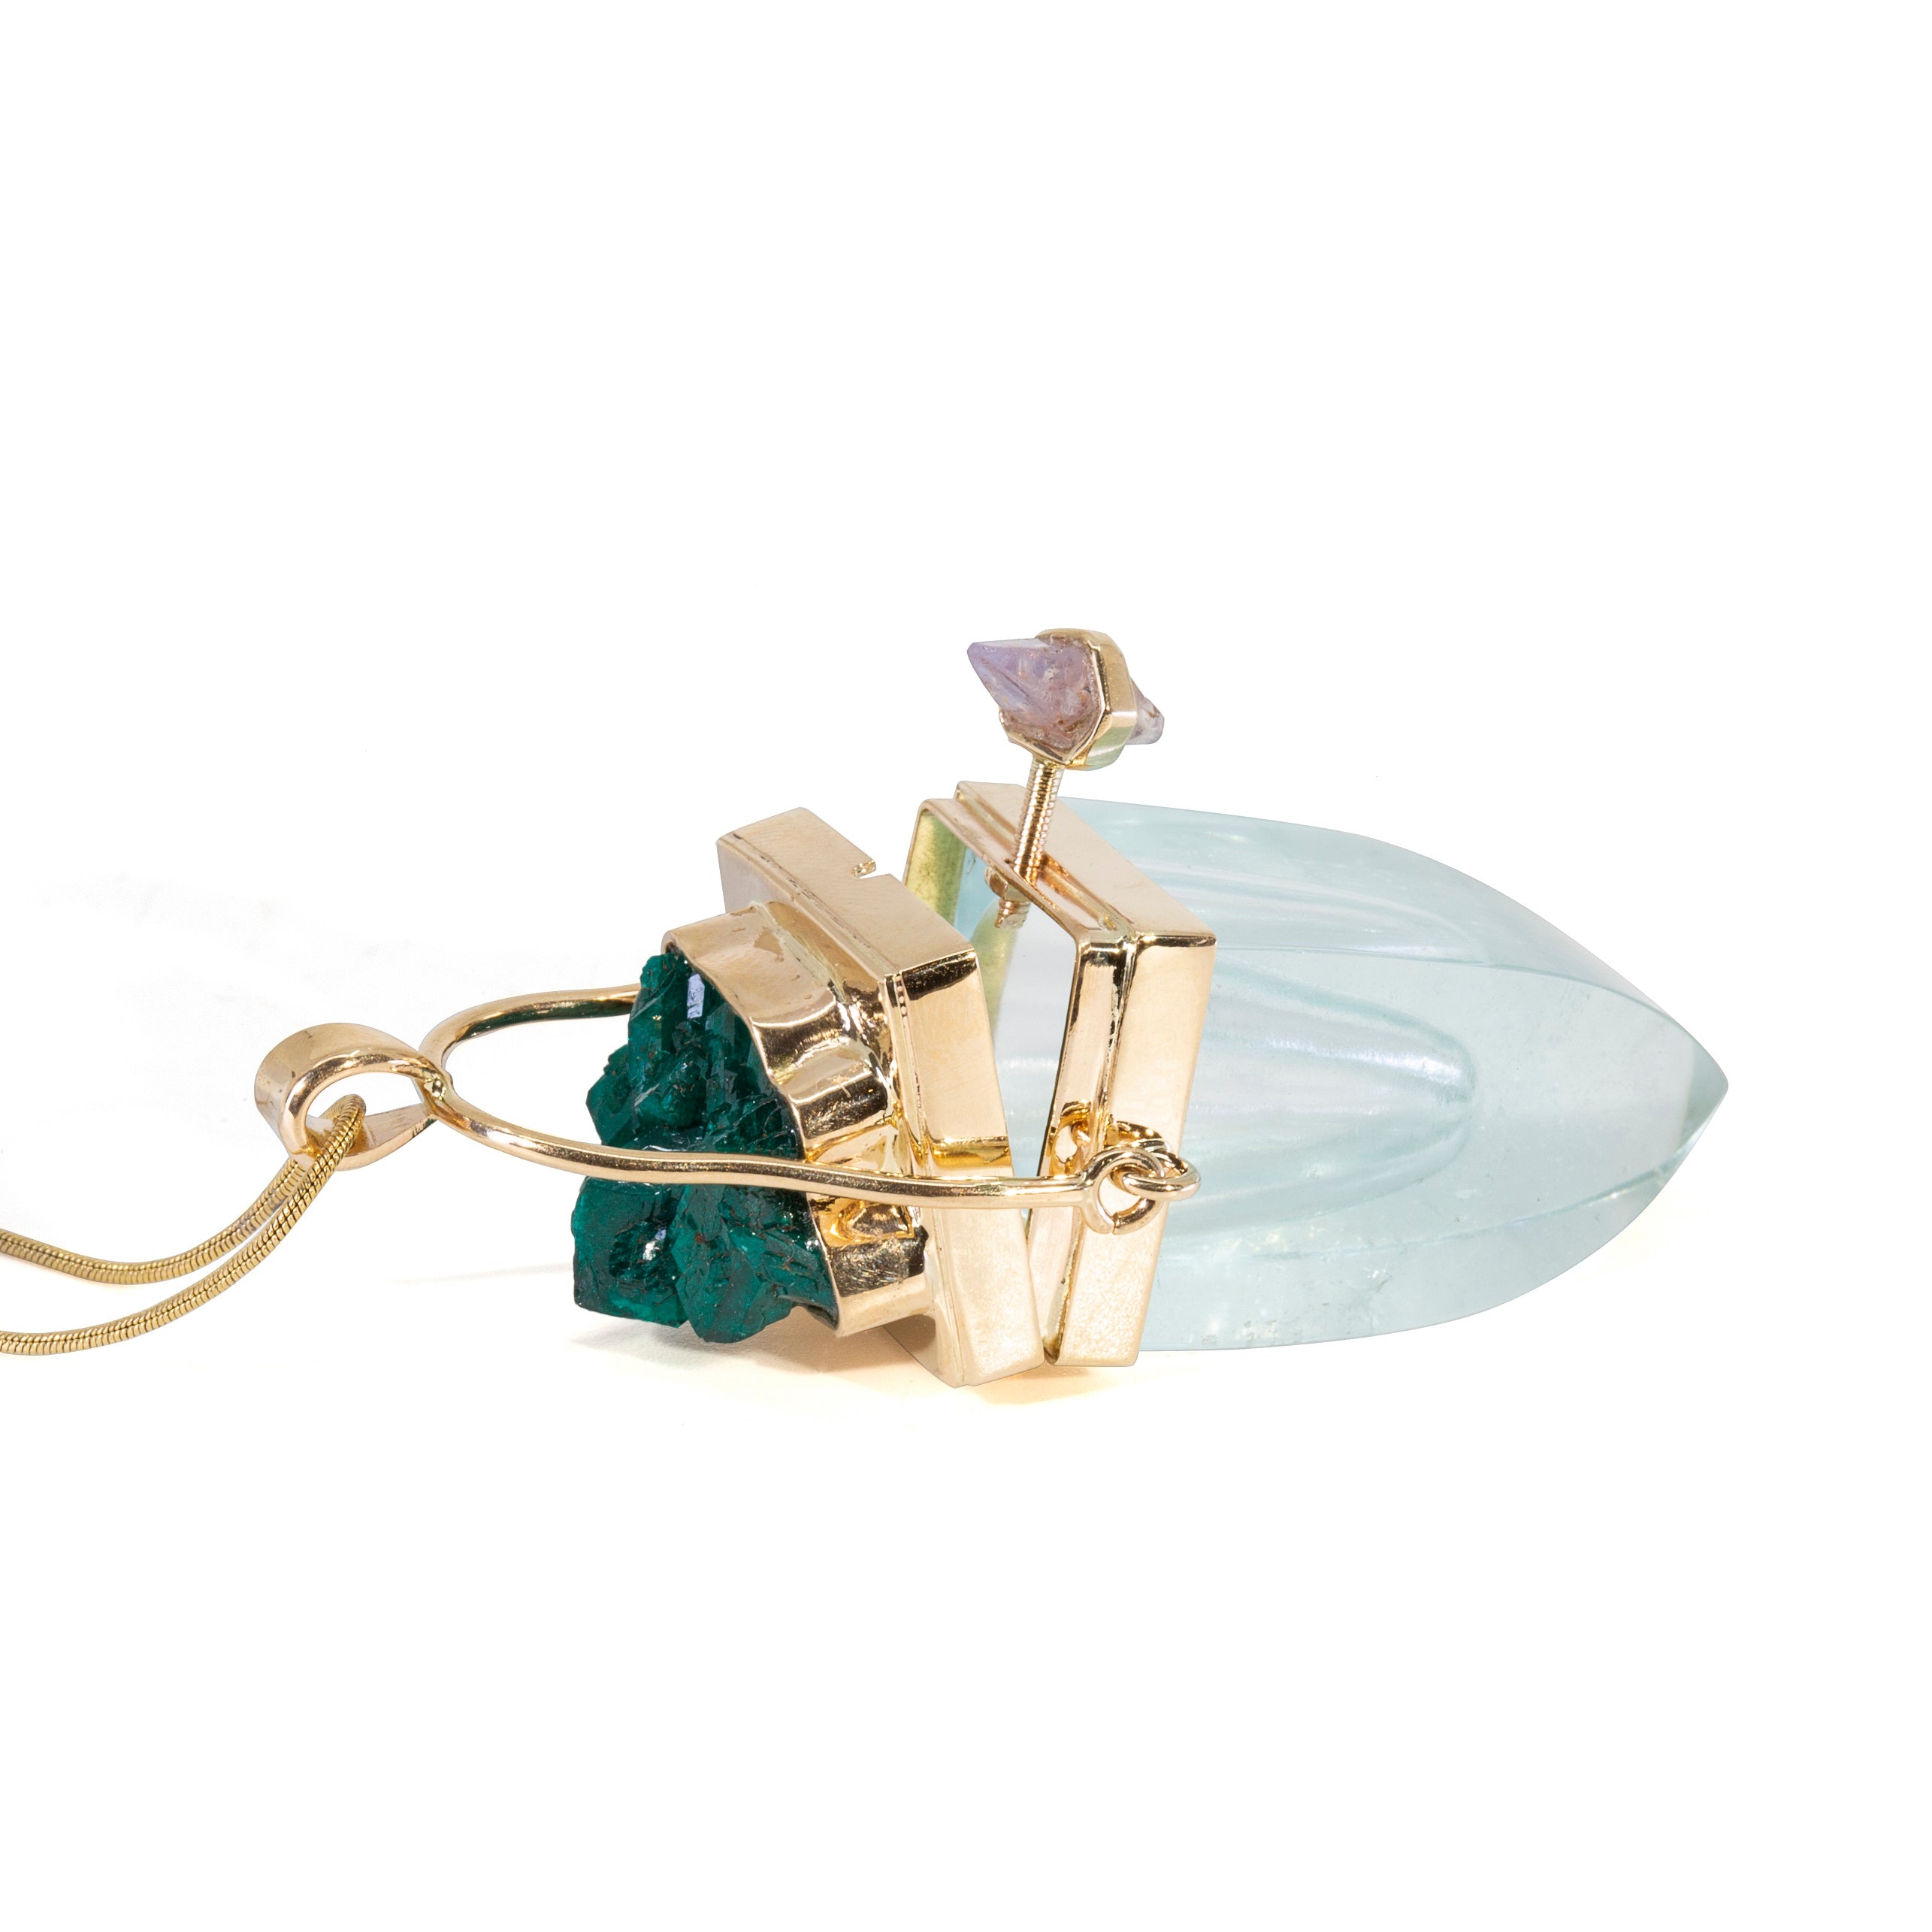 Aquamarine and Dioptase with Natural Sapphire Accent 14k Handcrafted Vessel Pendant - JJO-073 - Crystalarium